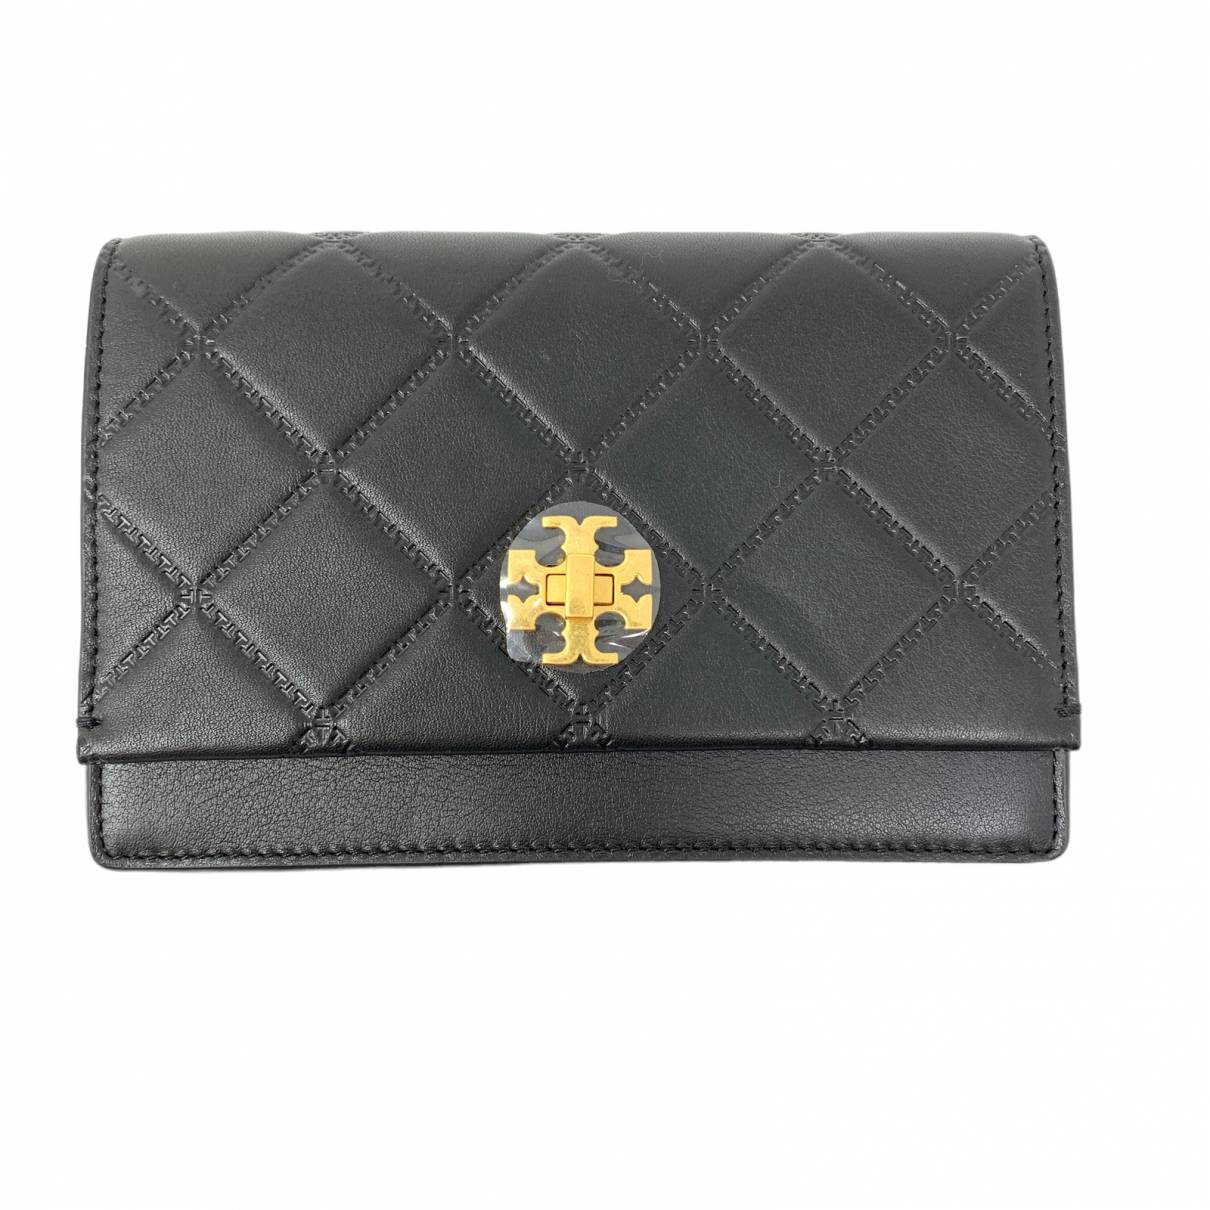 Leather clutch bag Tory Burch Black in Leather - 26709173